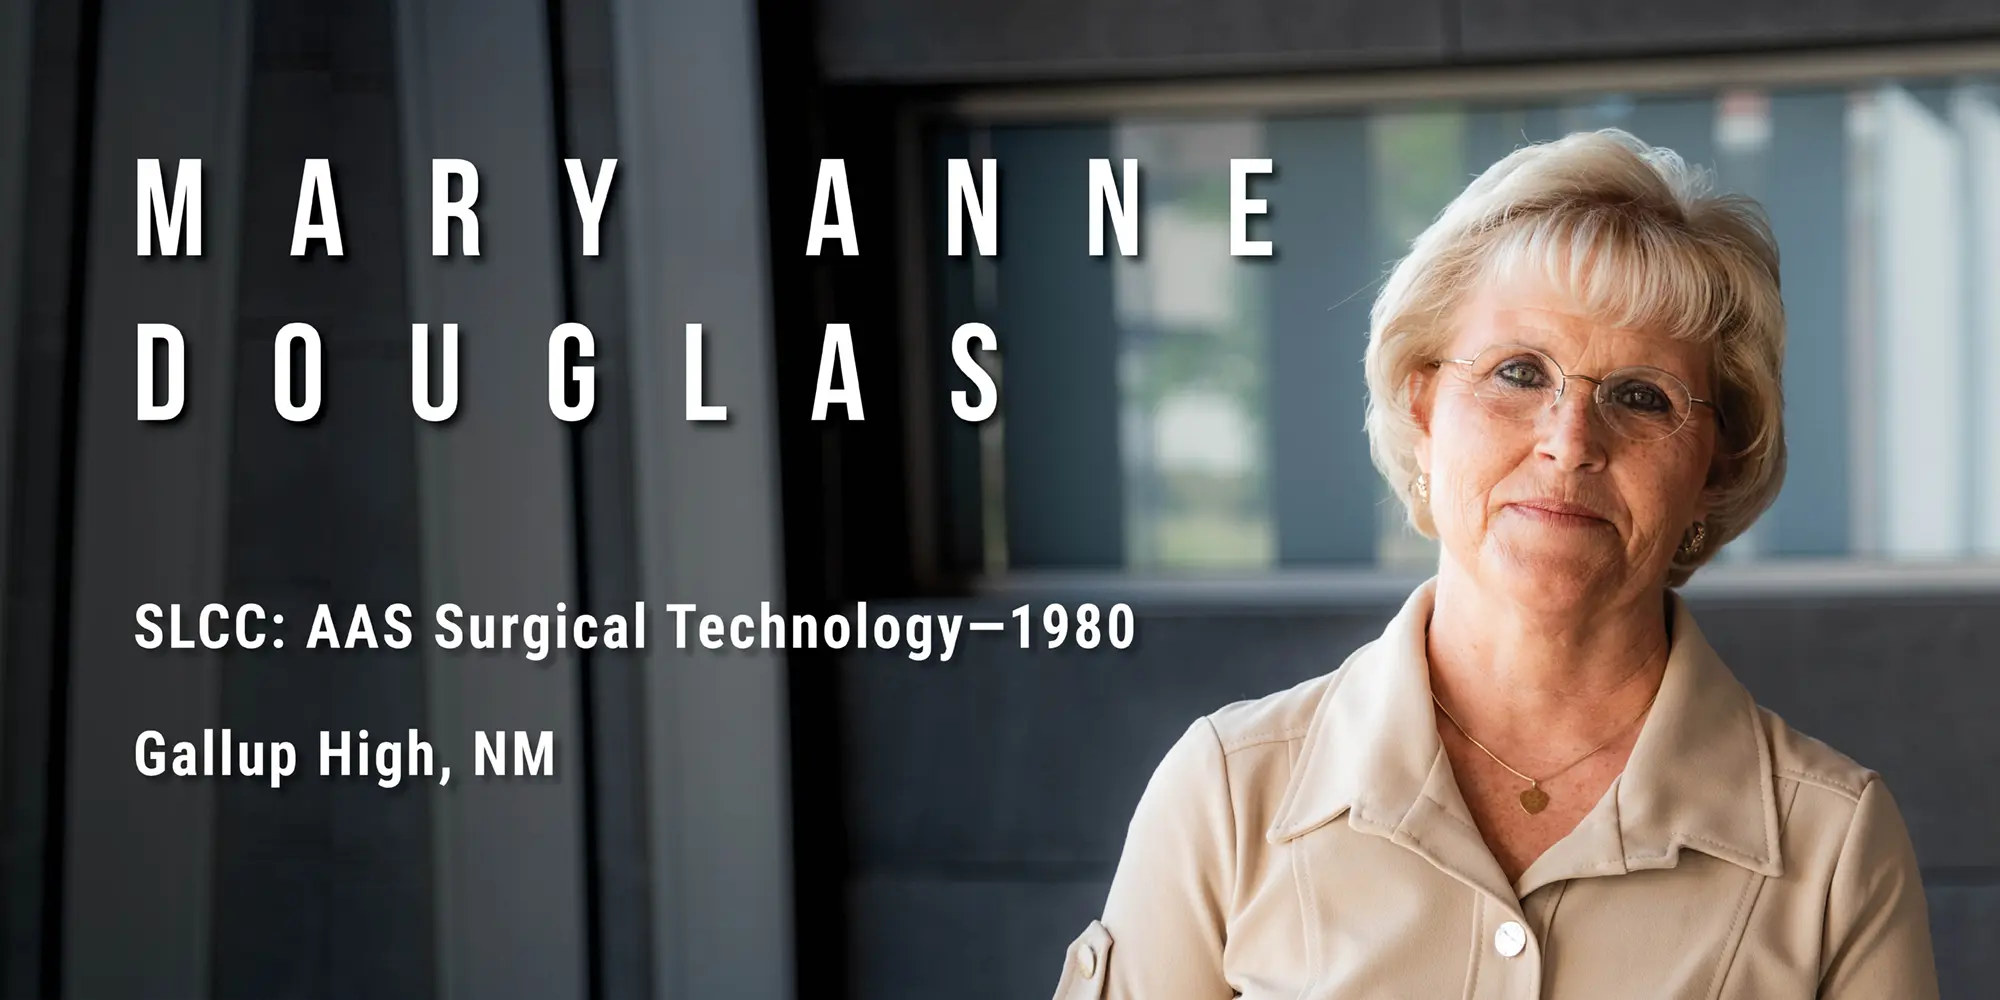 Mary Anne Douglas, SLCC AAS Surgical Technology in 1980, From Gallup High, New Mexico